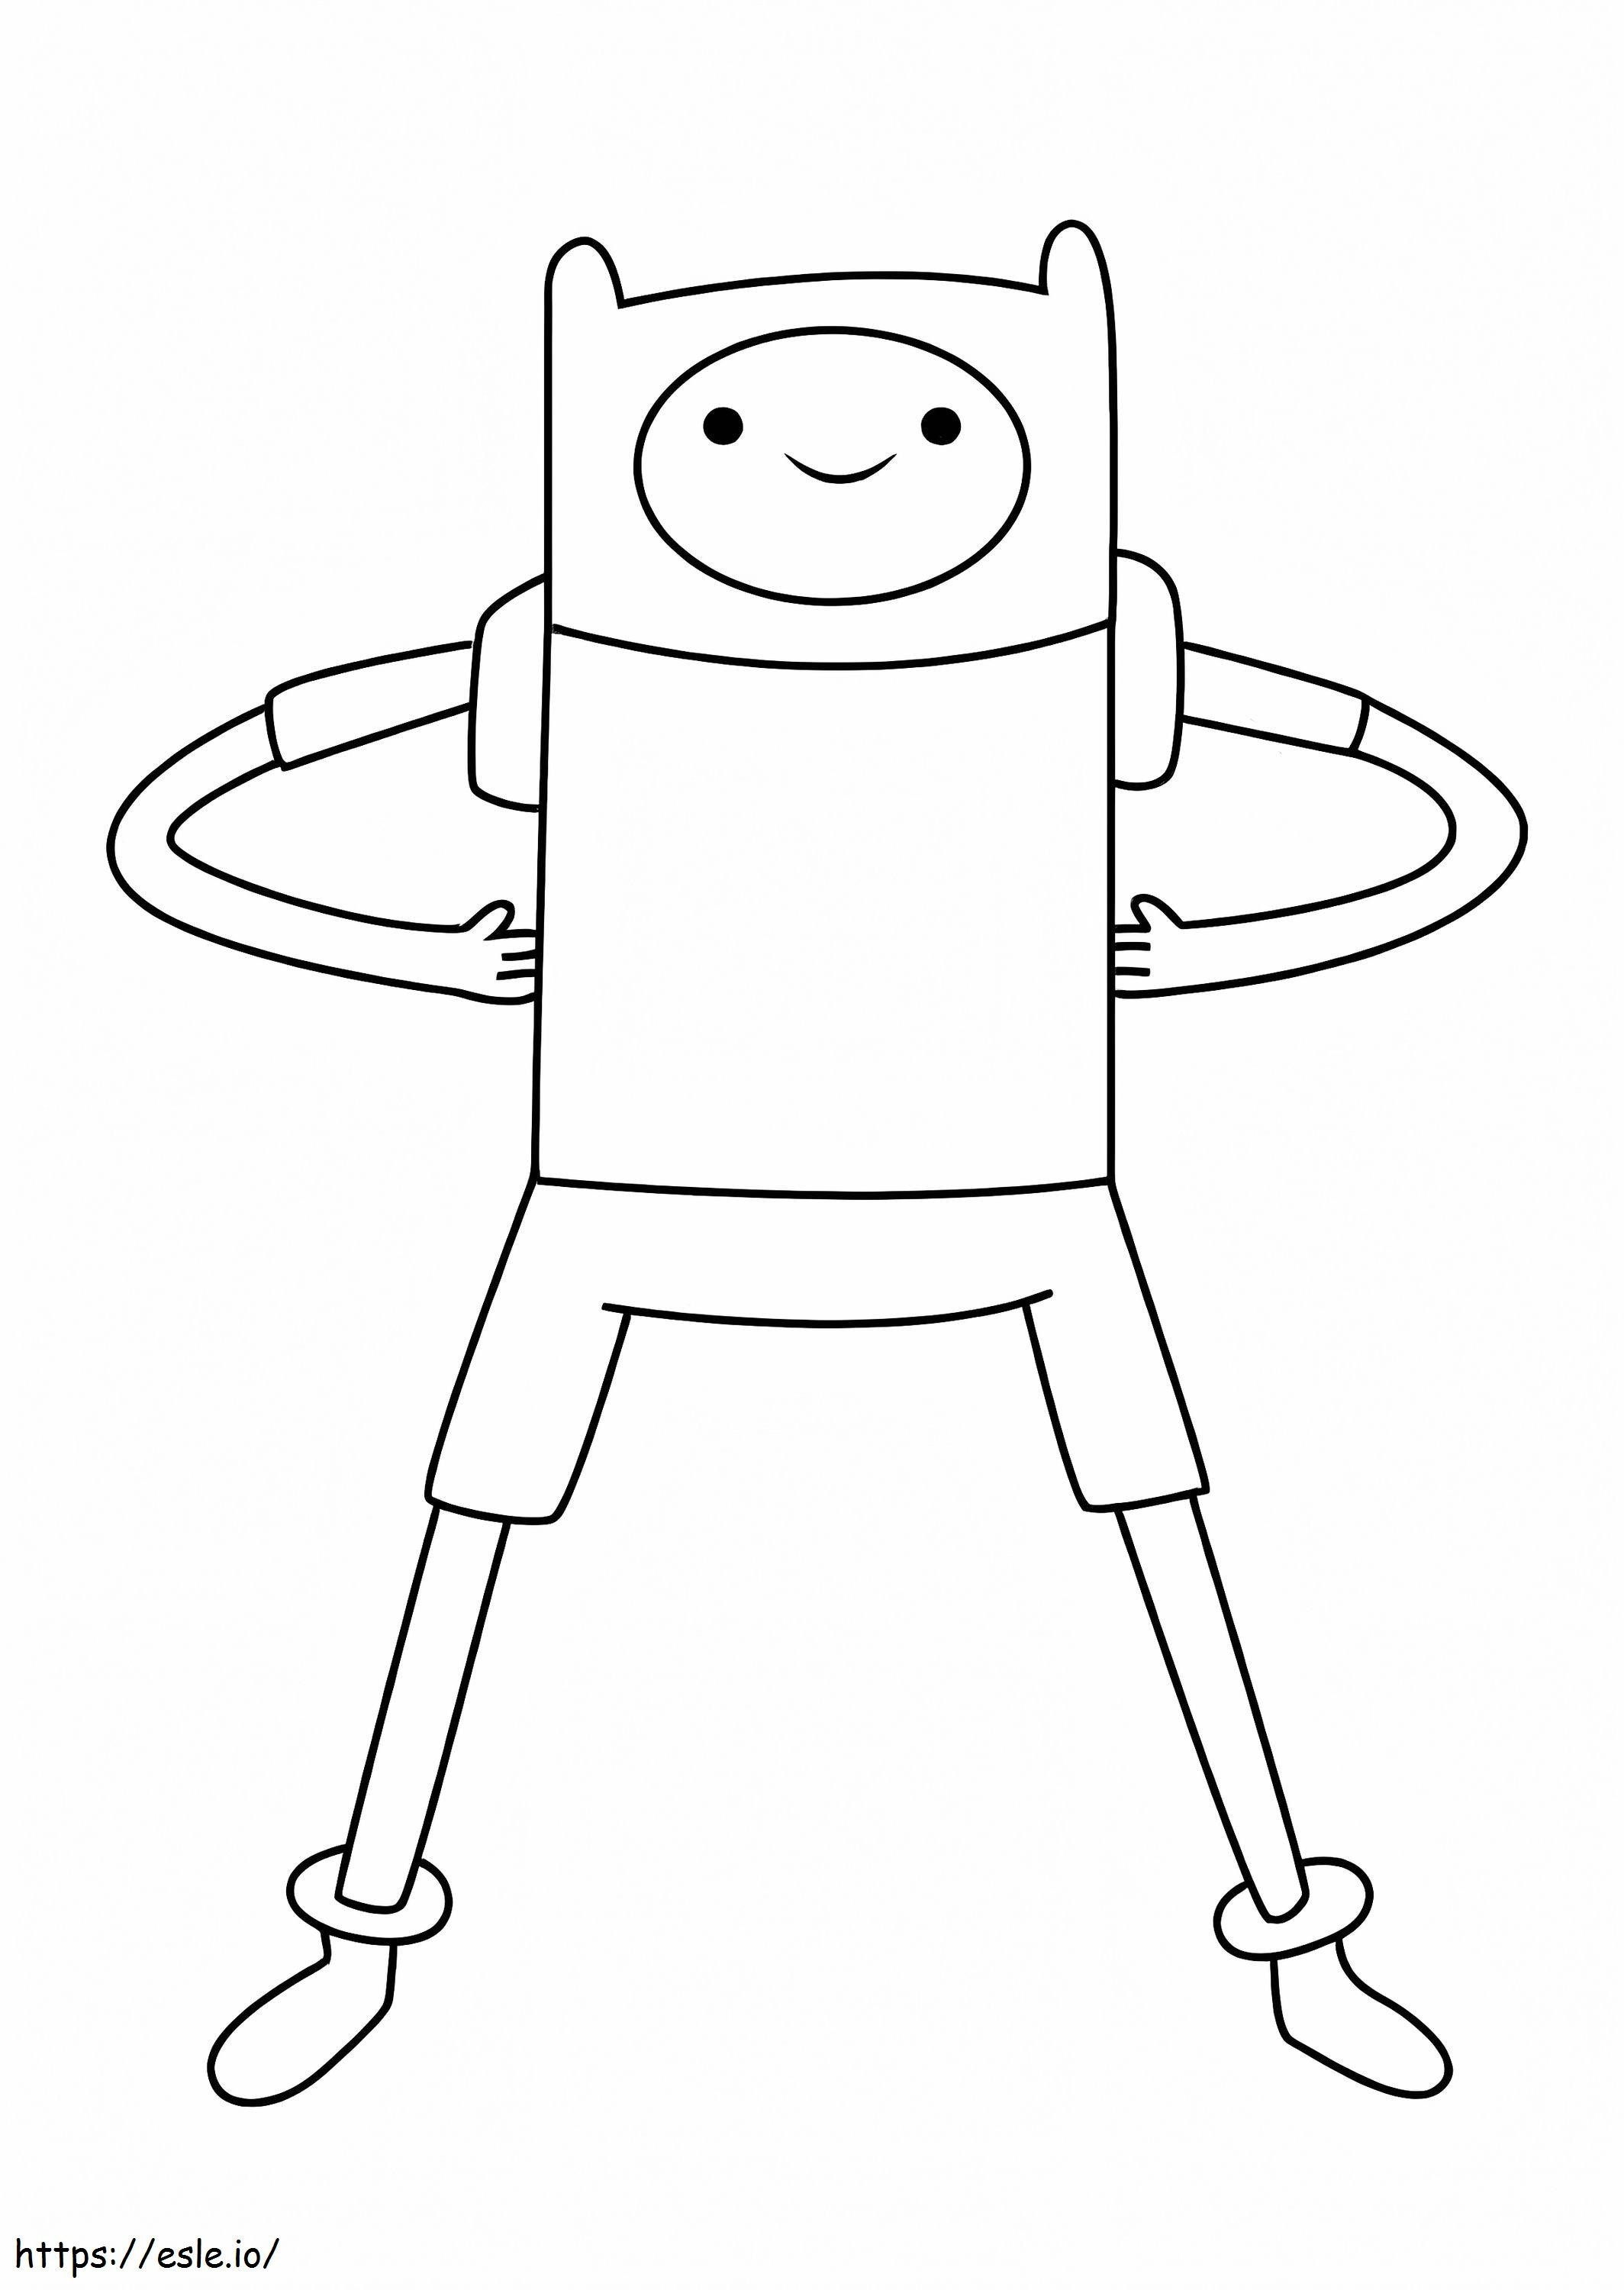 Funny Finn coloring page